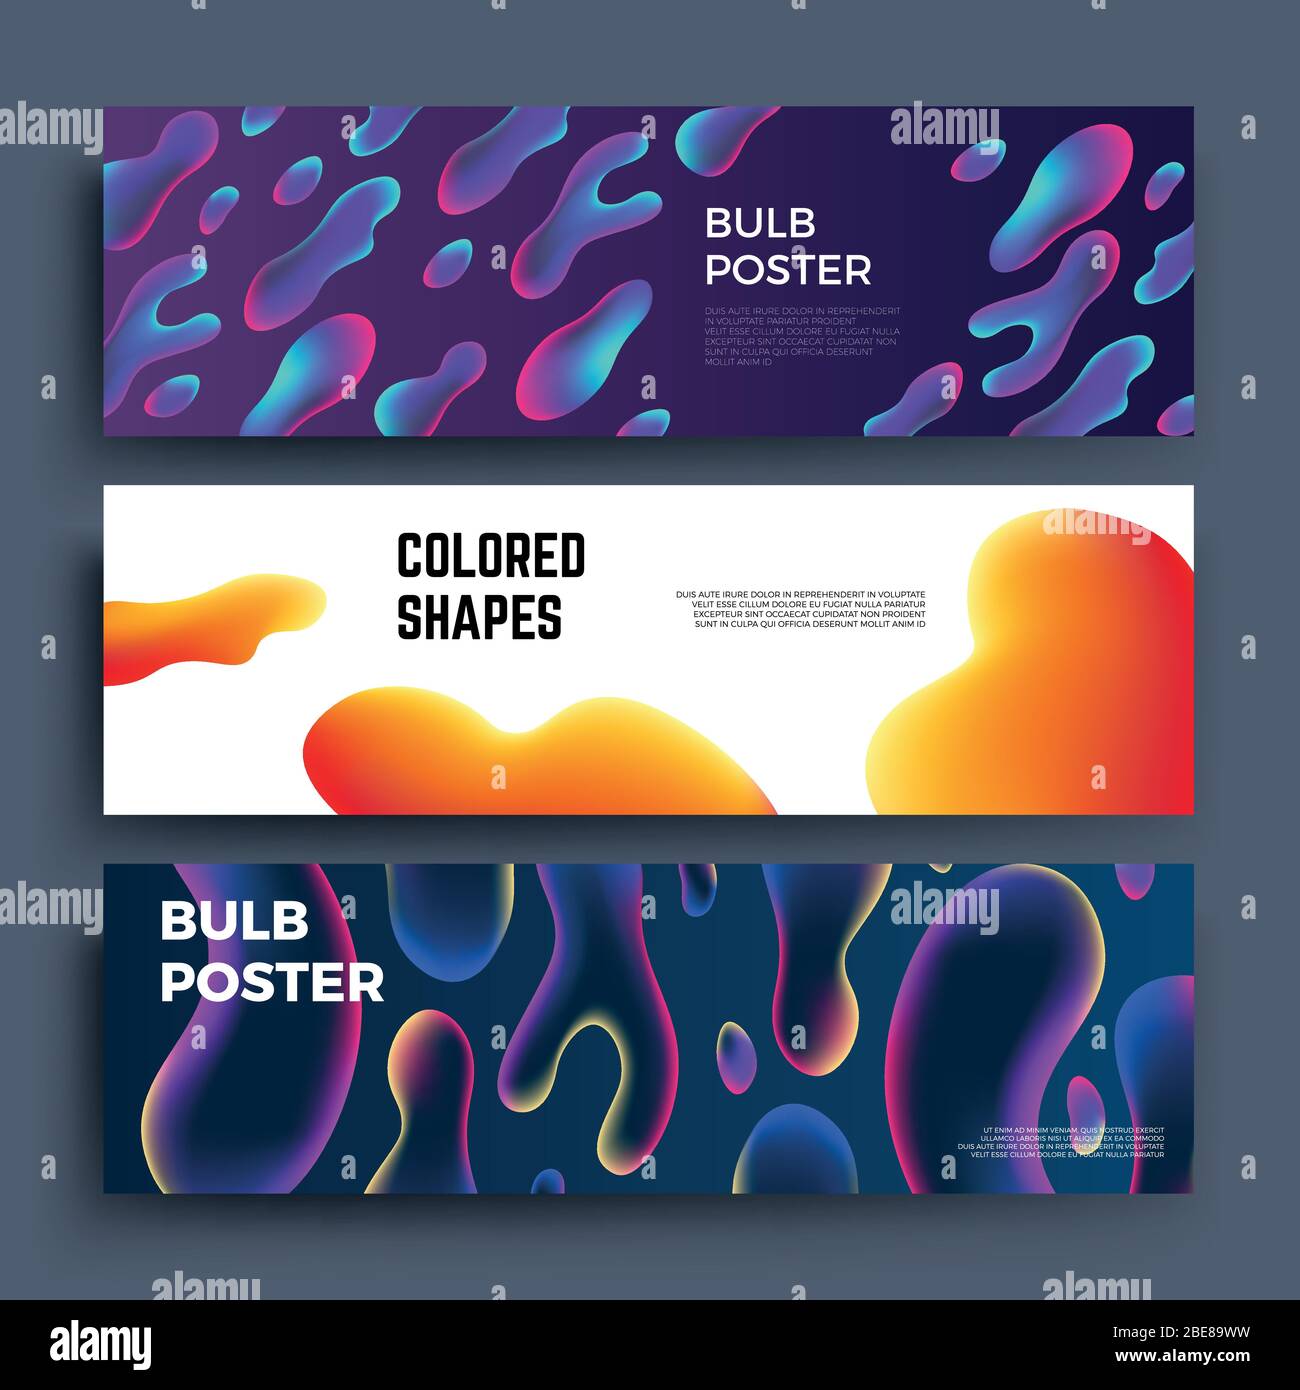 Biology molecular liquid shapes and fluid abstract objects vector banners set. Card and banner with colored shapes illustration Stock Vector